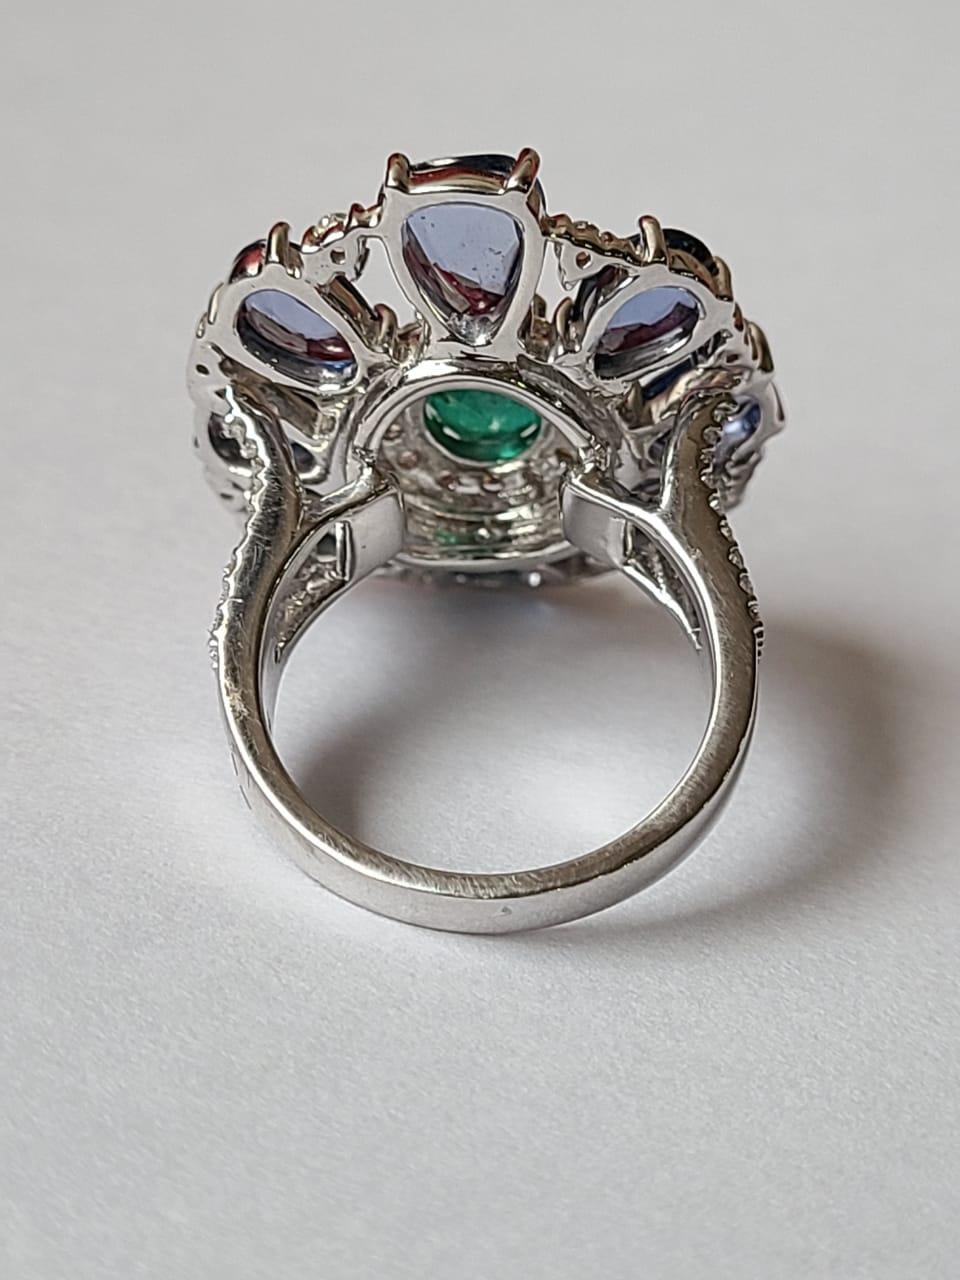 Modern Natural Blue Sapphires, Emerald & Diamonds Cocktail Ring Set in 18K White Gold